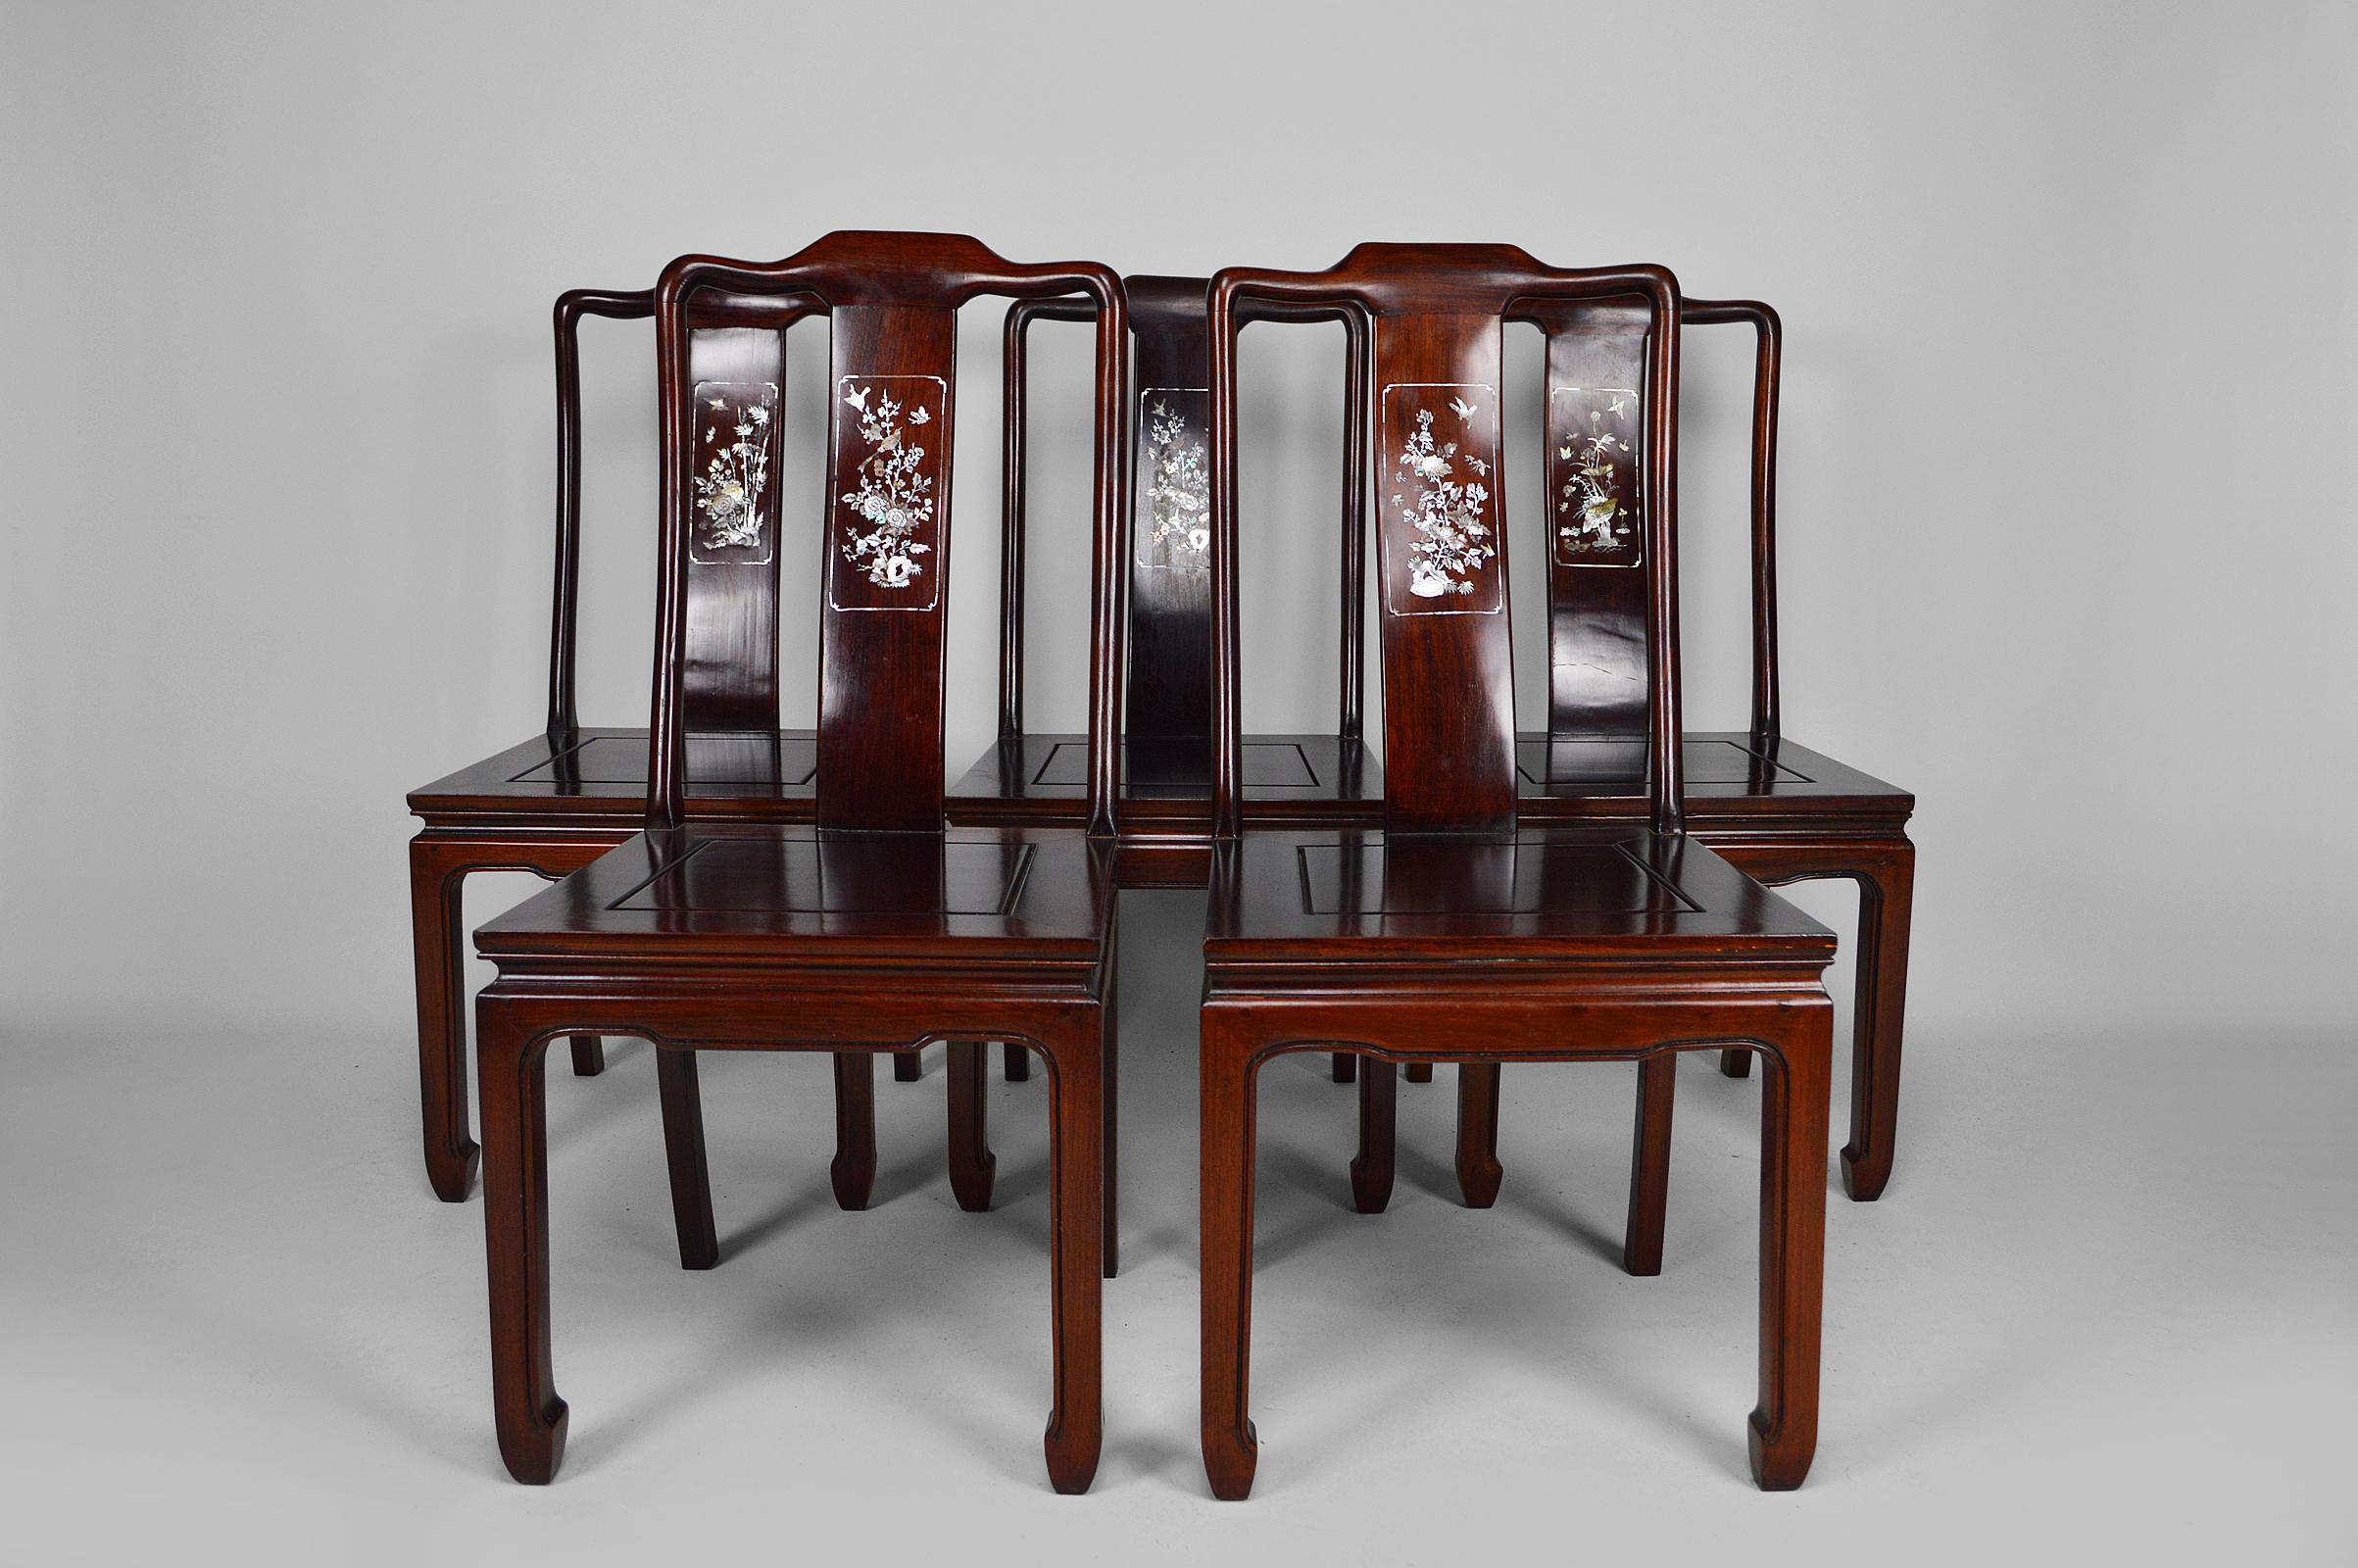 Set of 5 wooden inlaid dining chairs.

Vegetable (flowers, bamboo) and animal (birds, insects, butterflies, dragonflies) marquetry.

Each chair has a different marquetry.

Very good build quality.
Indochina or Southern China, mid-20th